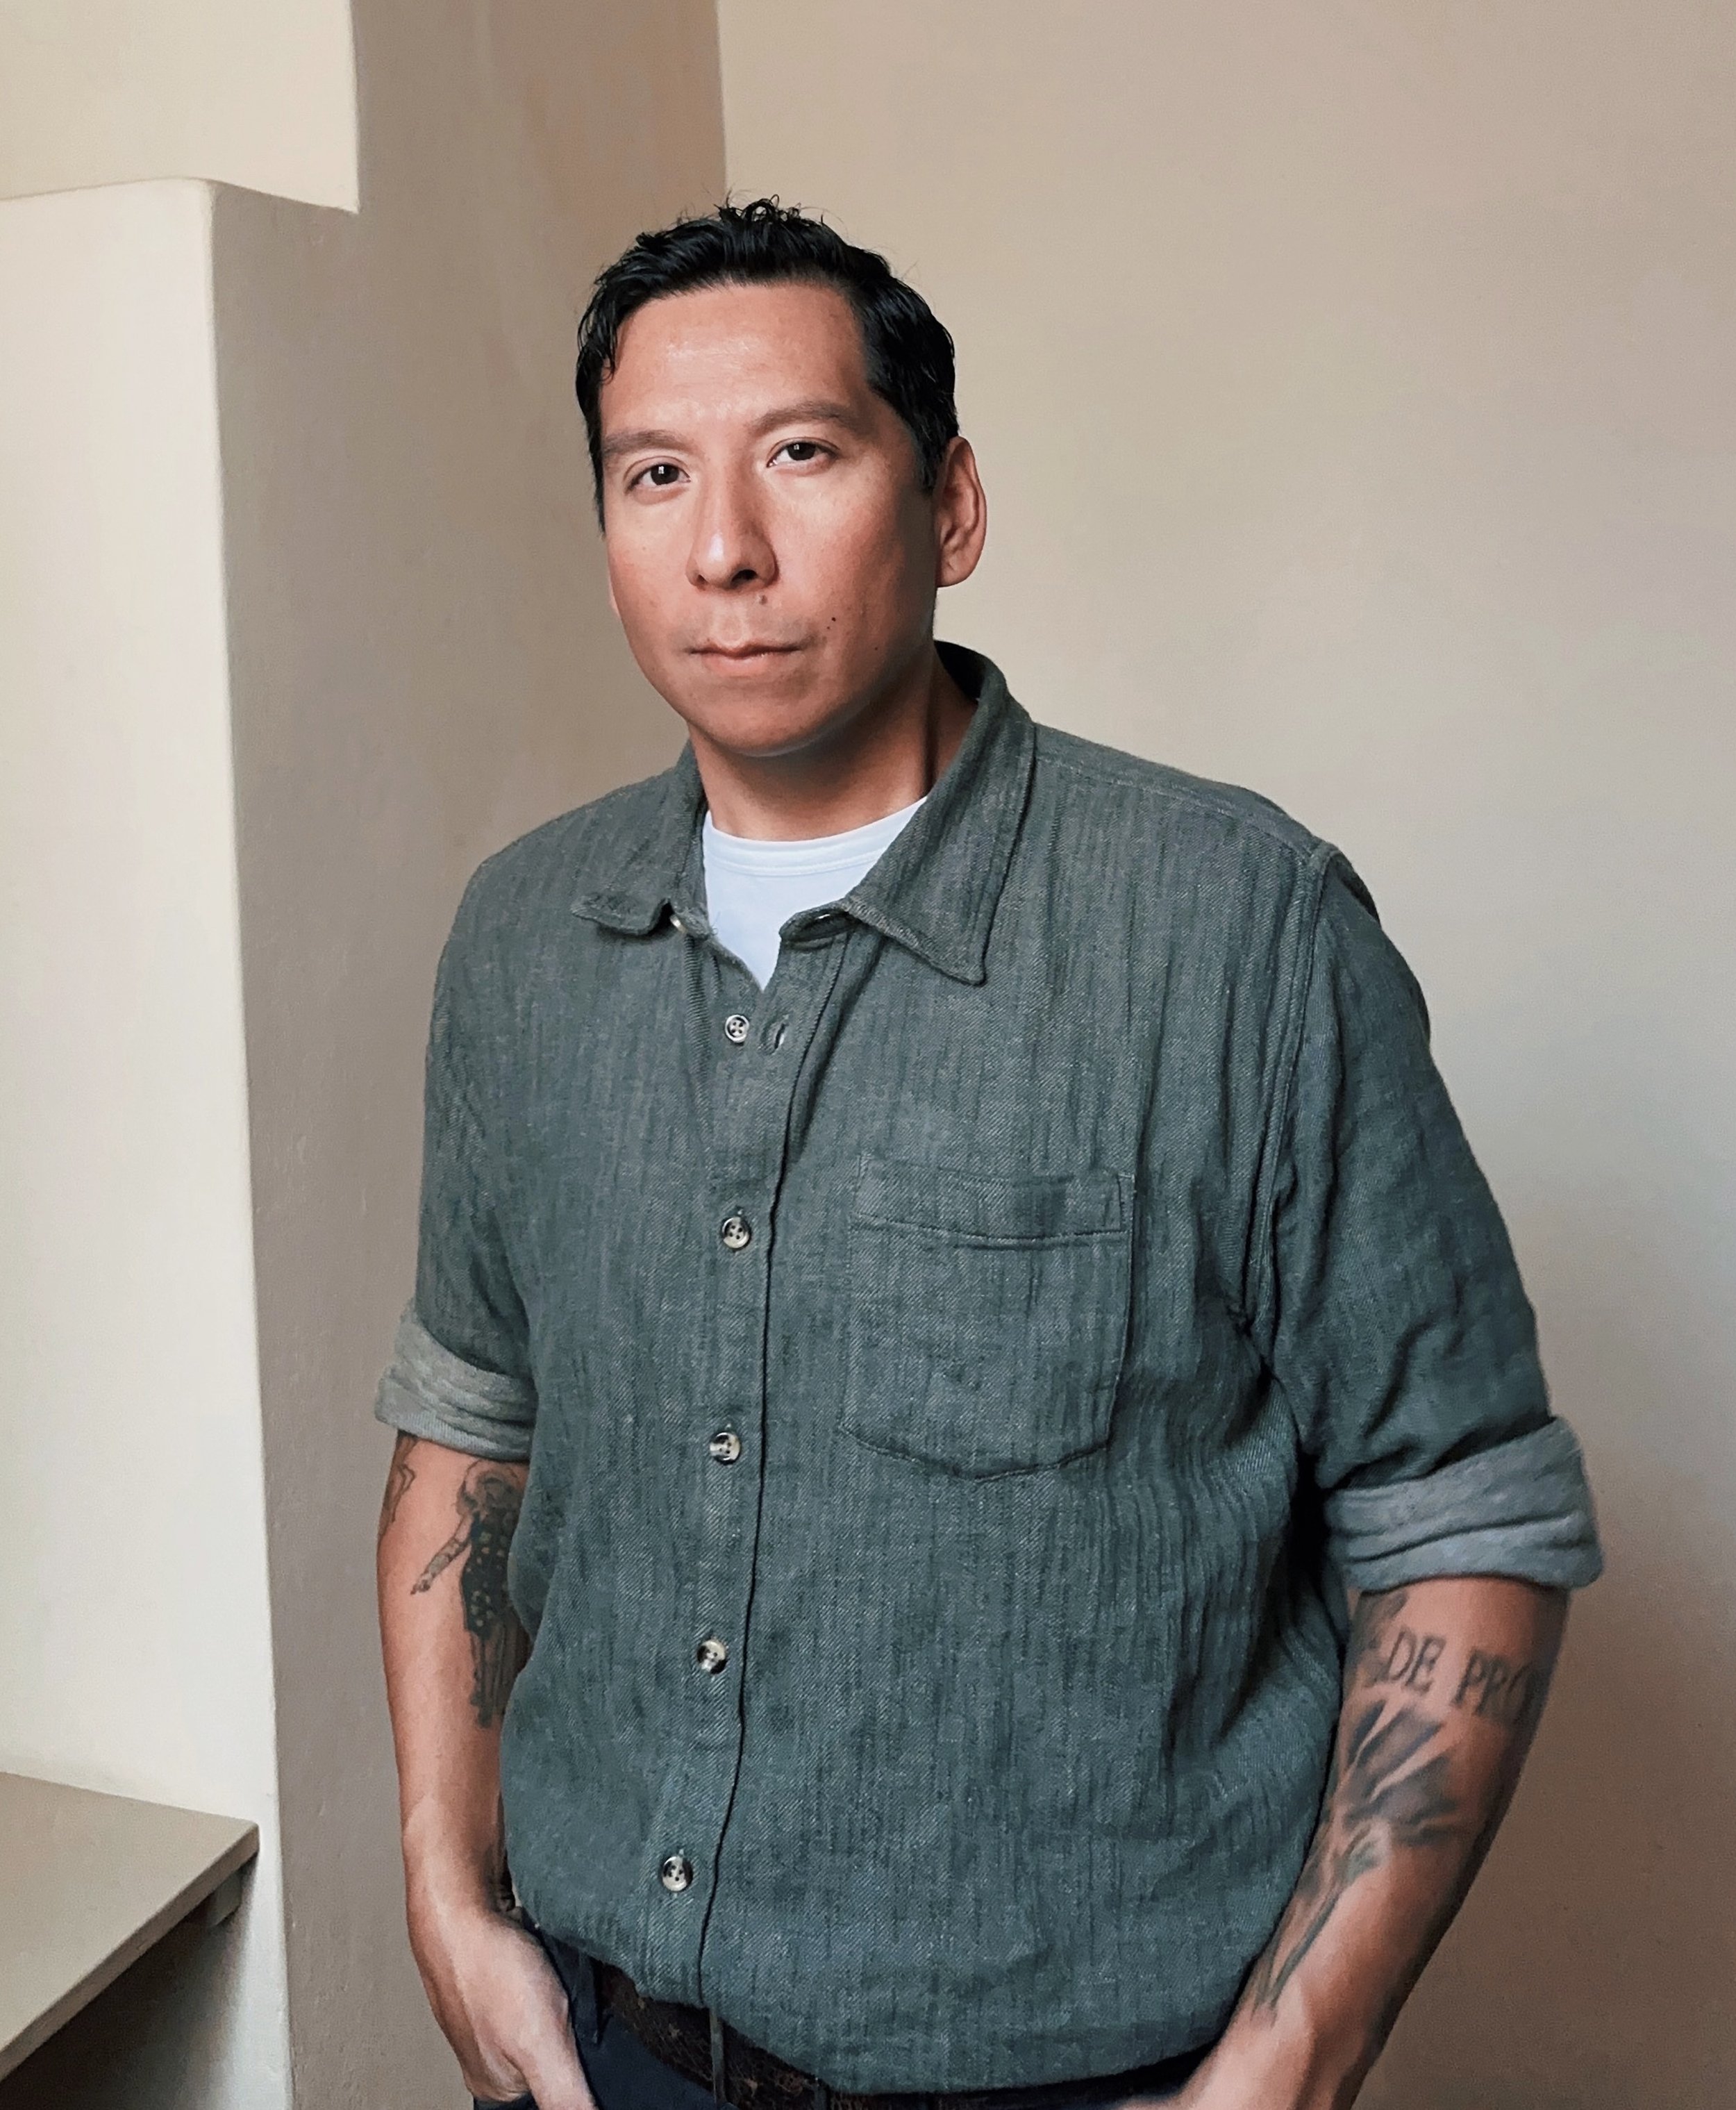 Sky Hopinka standing relaxed in a corner with hands in pockets. His sleeves are rolled up, showing indigenous-themed tattoos on his forearms.